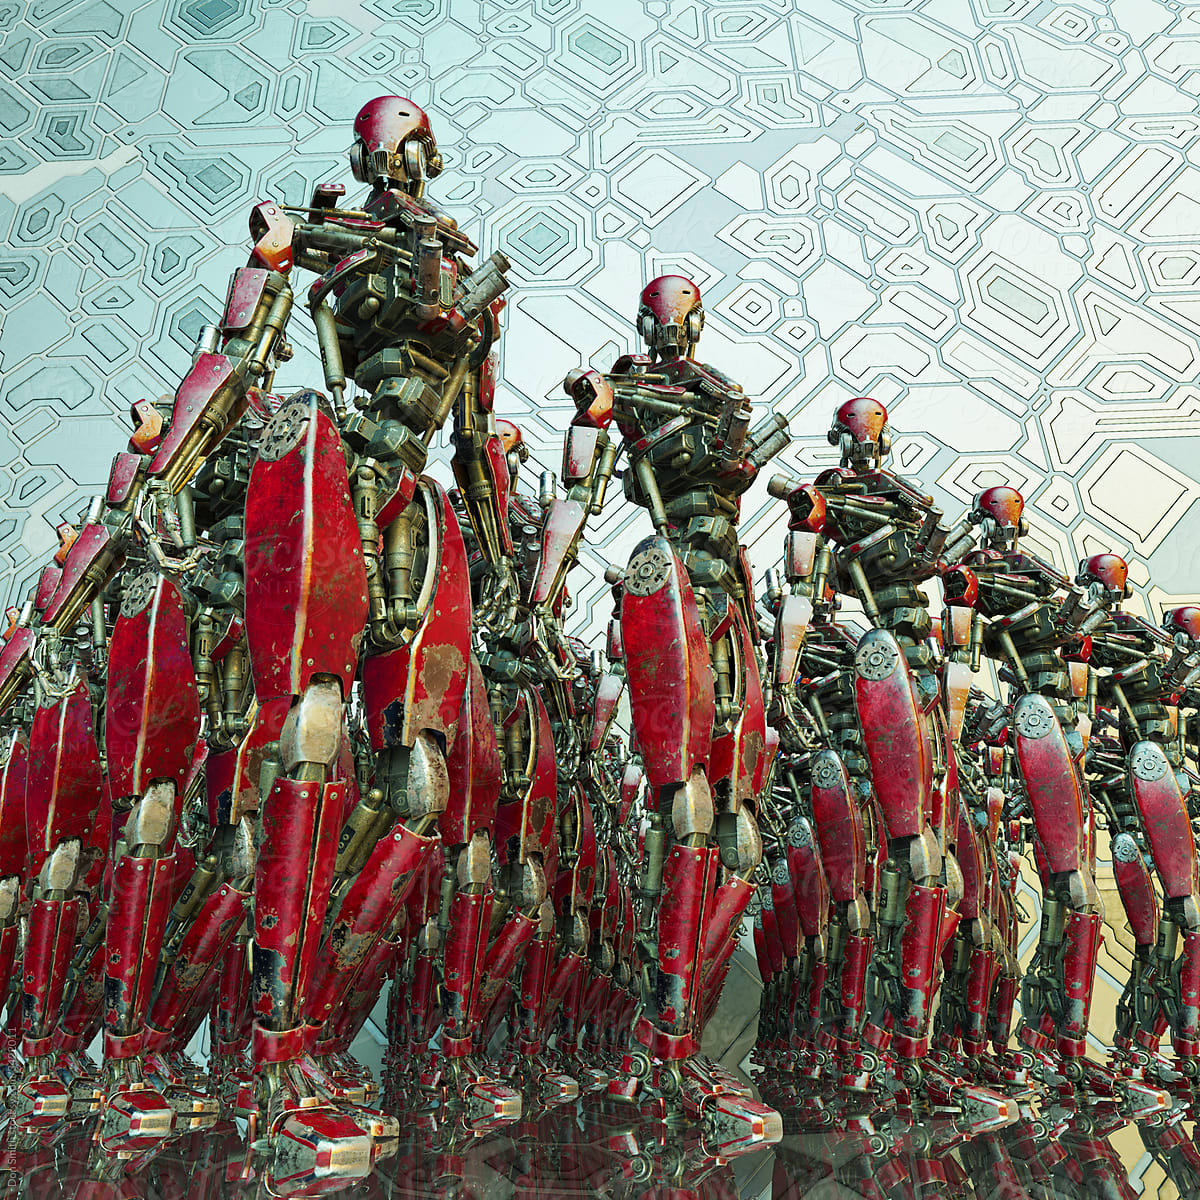 Army of robots